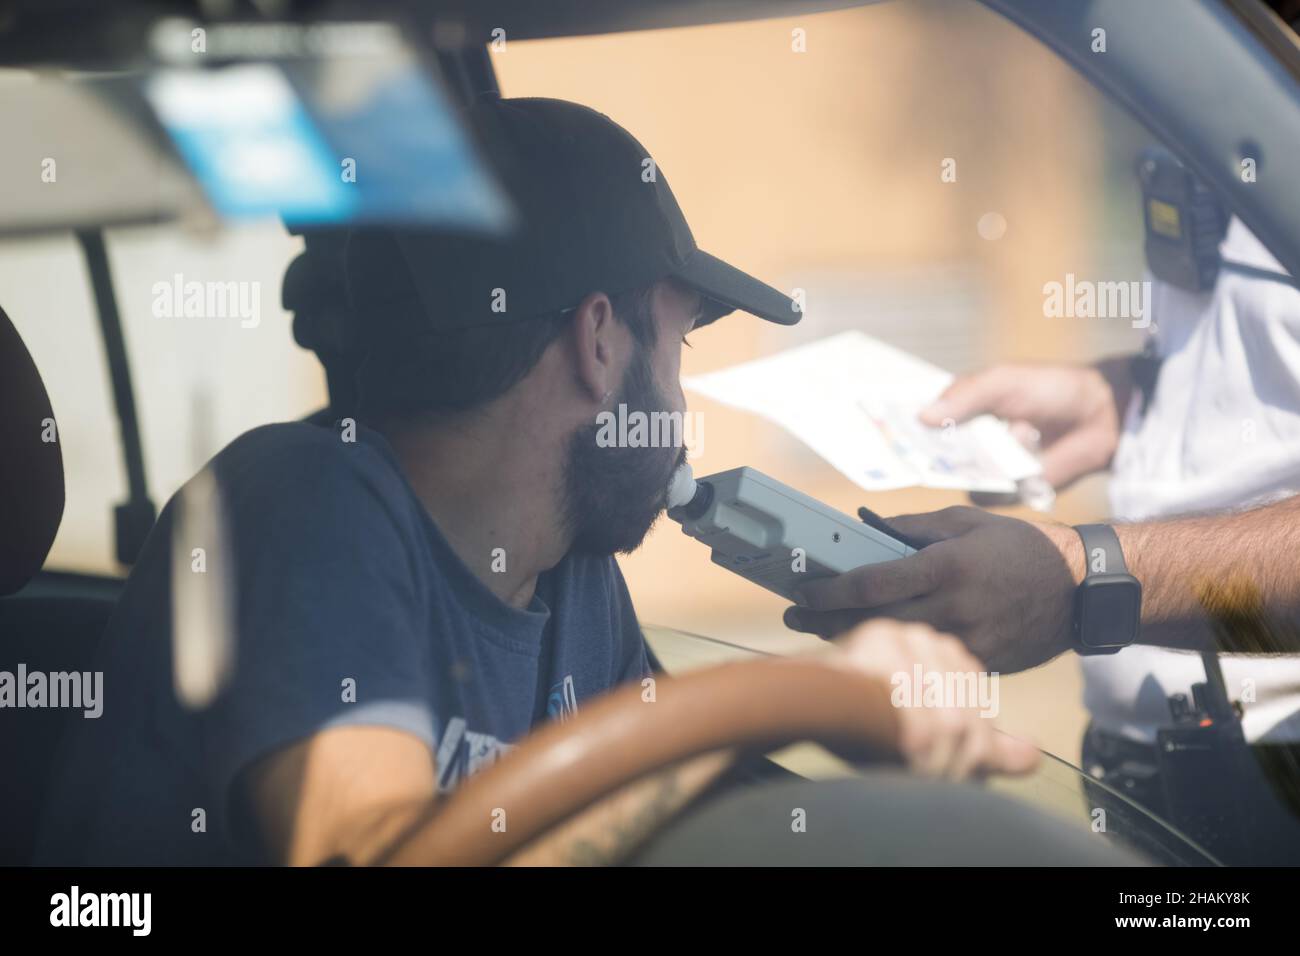 Highway 2 Bucharest - Constanta, Romania - 10 August, 2021: Romanian Road Police officer hands a breathalyser to a driver to test his alcohol level. Stock Photo